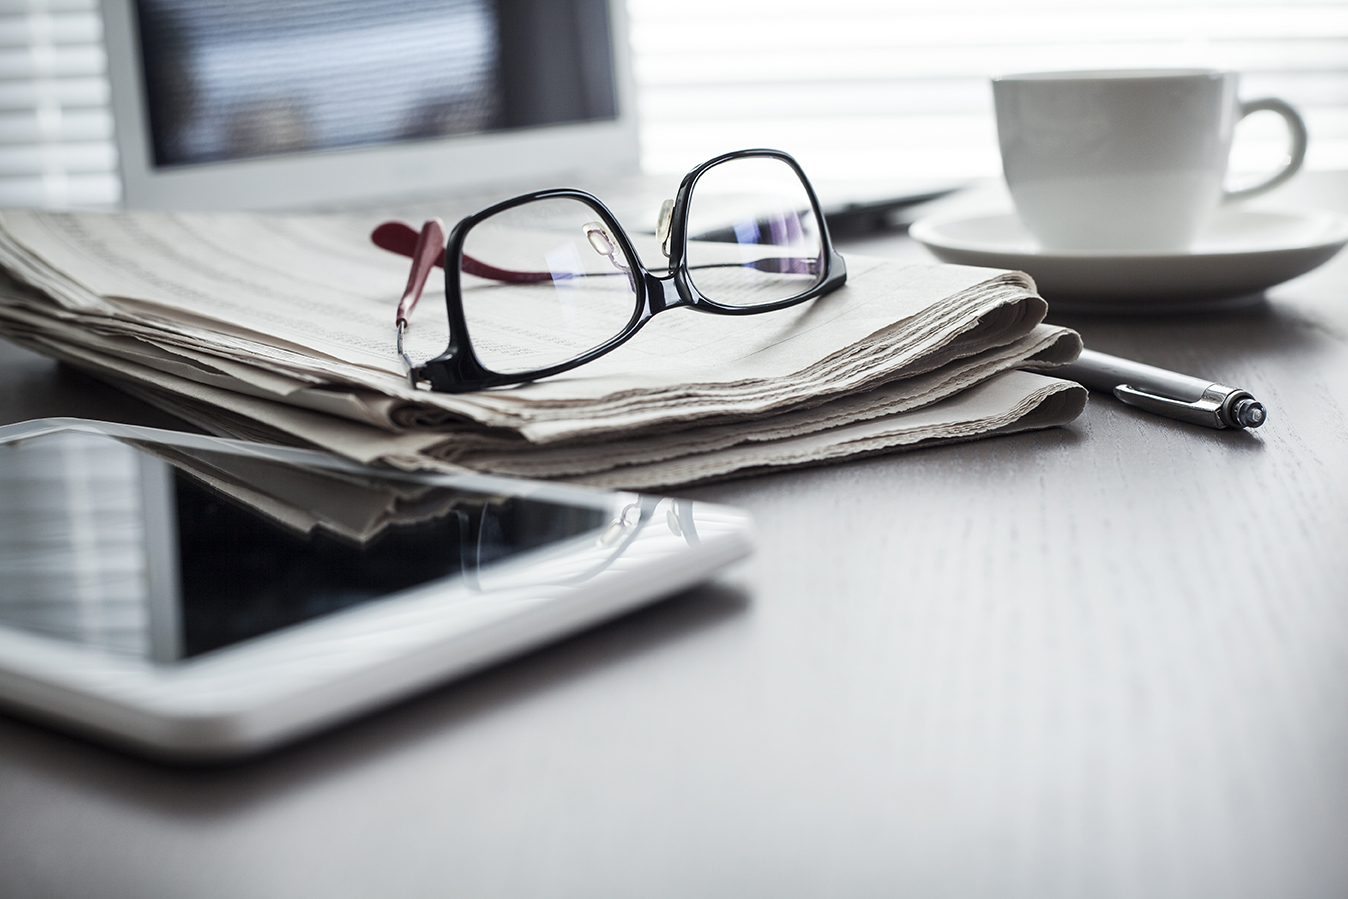 Eyeglasses and a newspaper next to a coffee cup